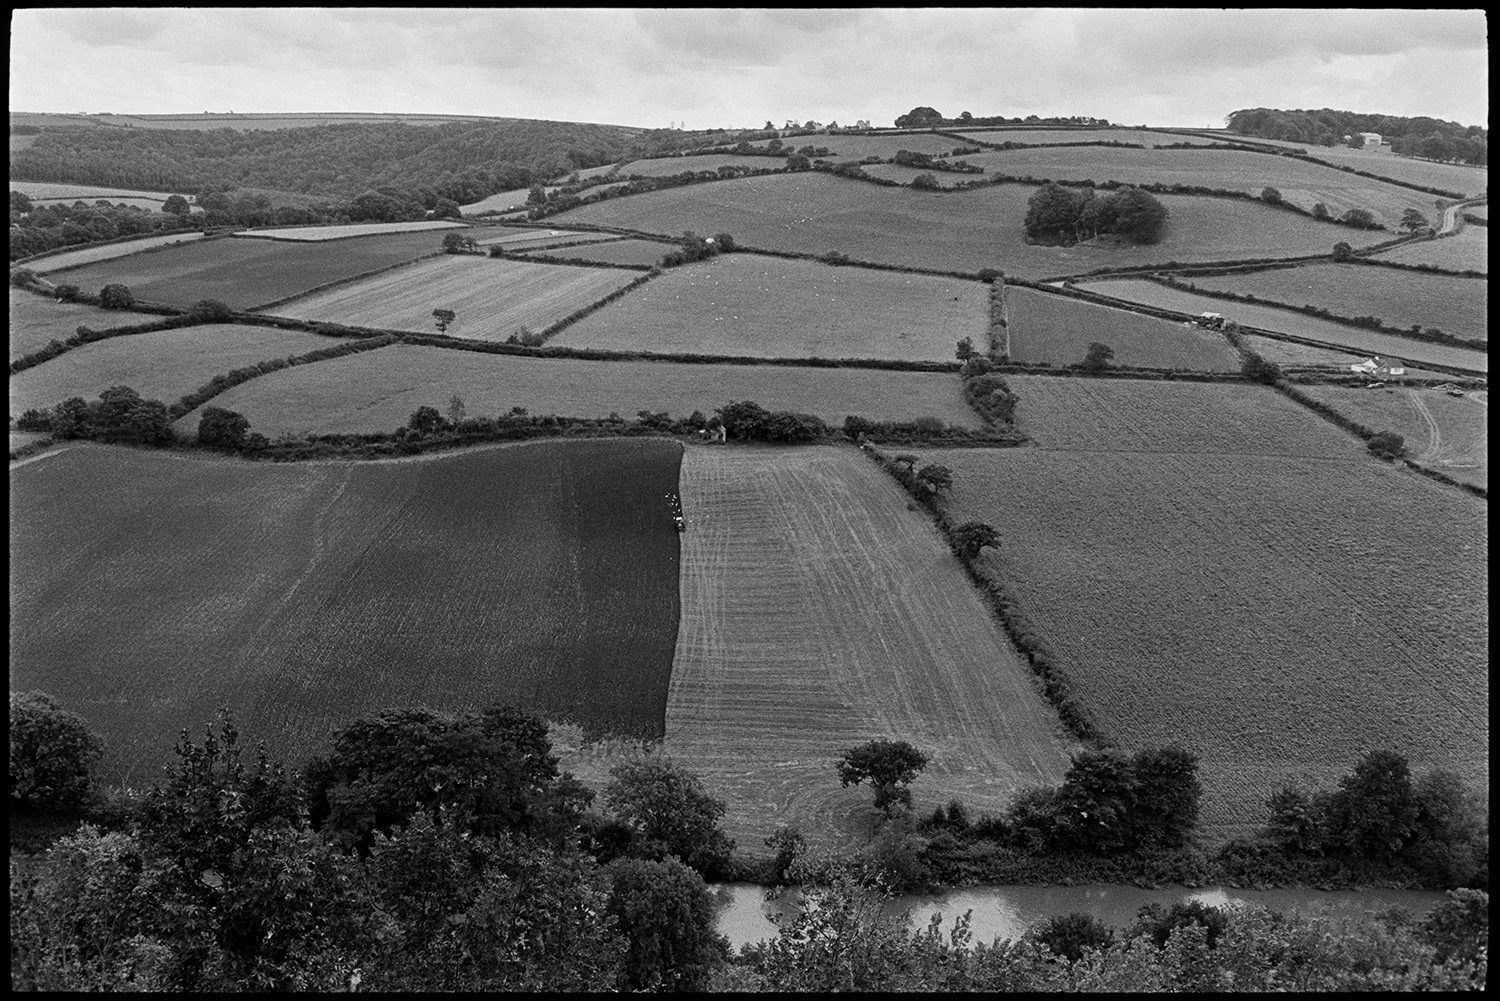 Landscape with ploughed fields clouds and hedgerows.
[A view of hills with woodland, fields and hedges at Torrington. The River Torridge is running past a field which is being ploughed in the foreground.]